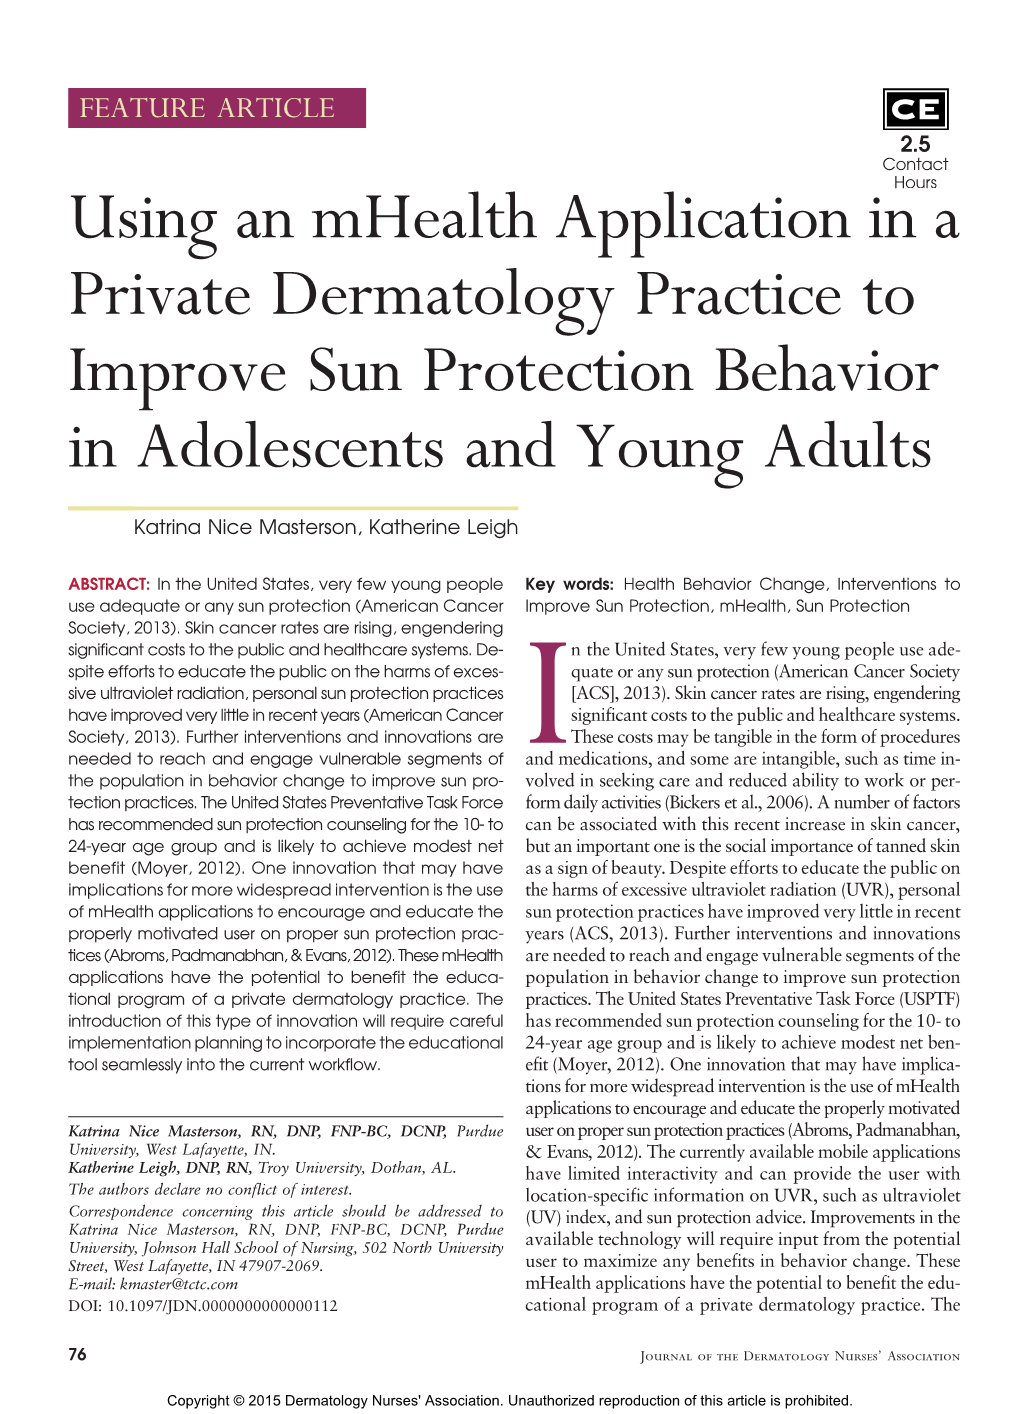 Using an Mhealth Application in a Private Dermatology Practice to Improve Sun Protection Behavior in Adolescents and Young Adults